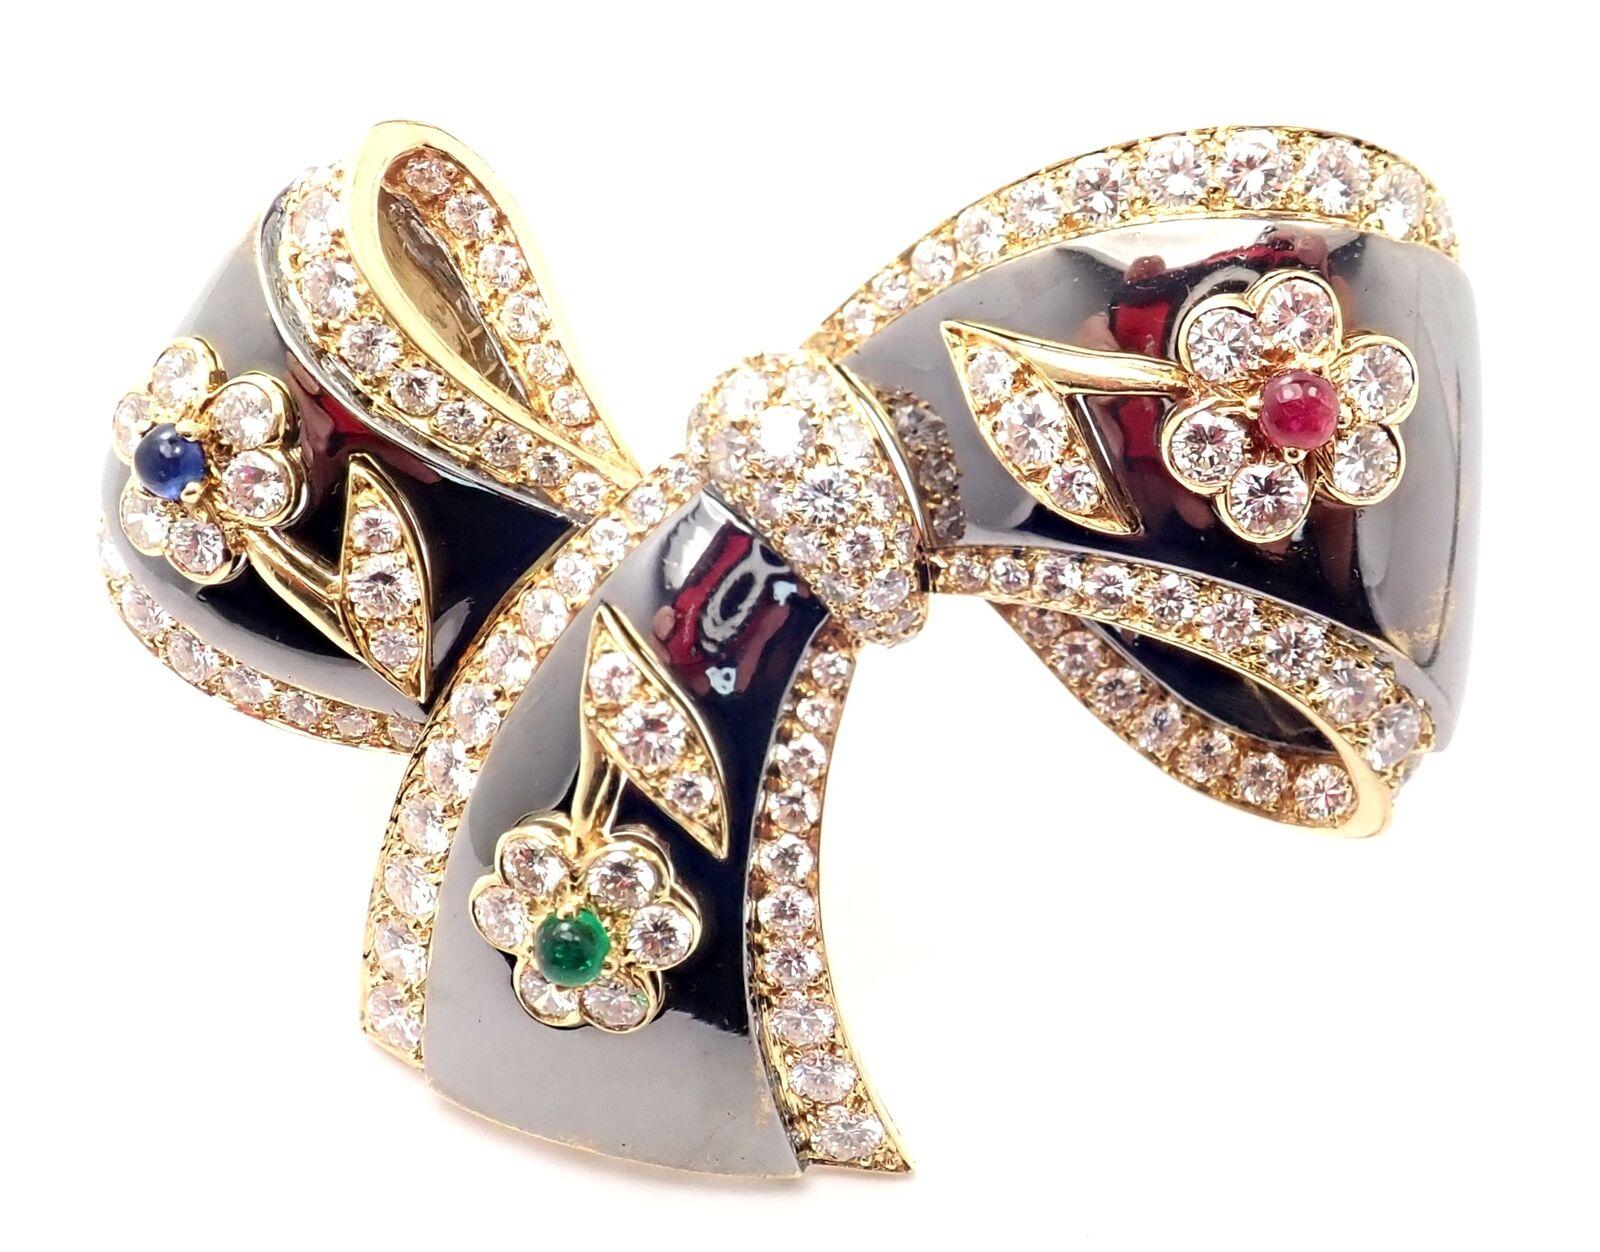 18k Yellow Gold Flower Diamond Emerald Sapphire Ruby Brooch Pin by Van Cleef & Arpels. 
With 126 round brilliant cut diamonds VVS1 clarity, E color total weight approx. 5.60ct
1 ruby, 1 emerald, 1 sapphire
Details: 
Measurements: 45mm x 57mm
Weight: